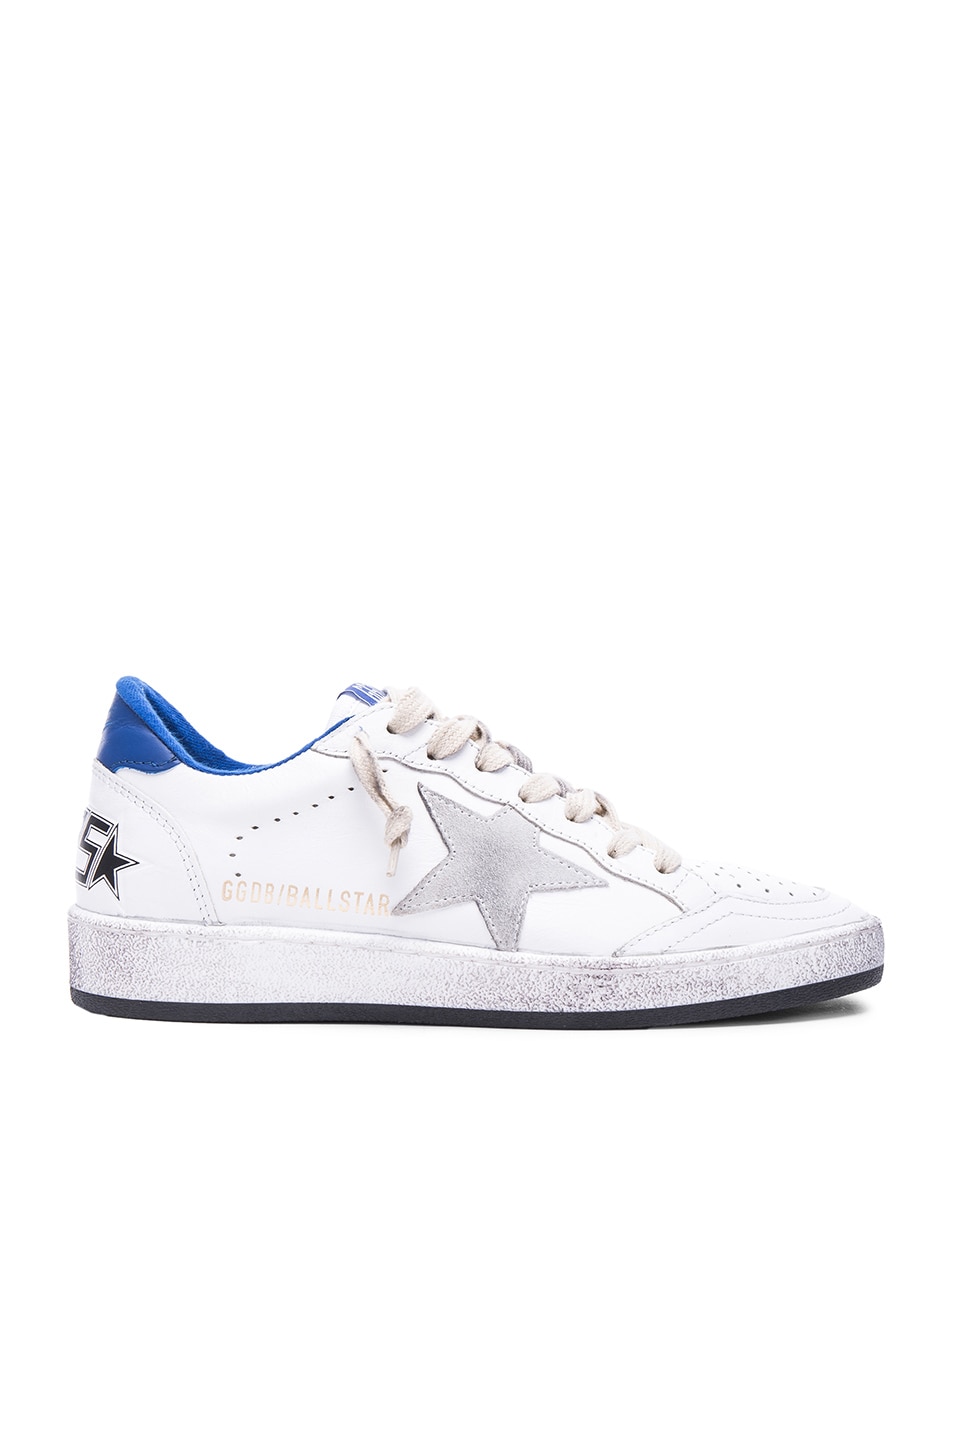 Image 1 of Golden Goose Ball Star Low Top Sneakers in White & Blue